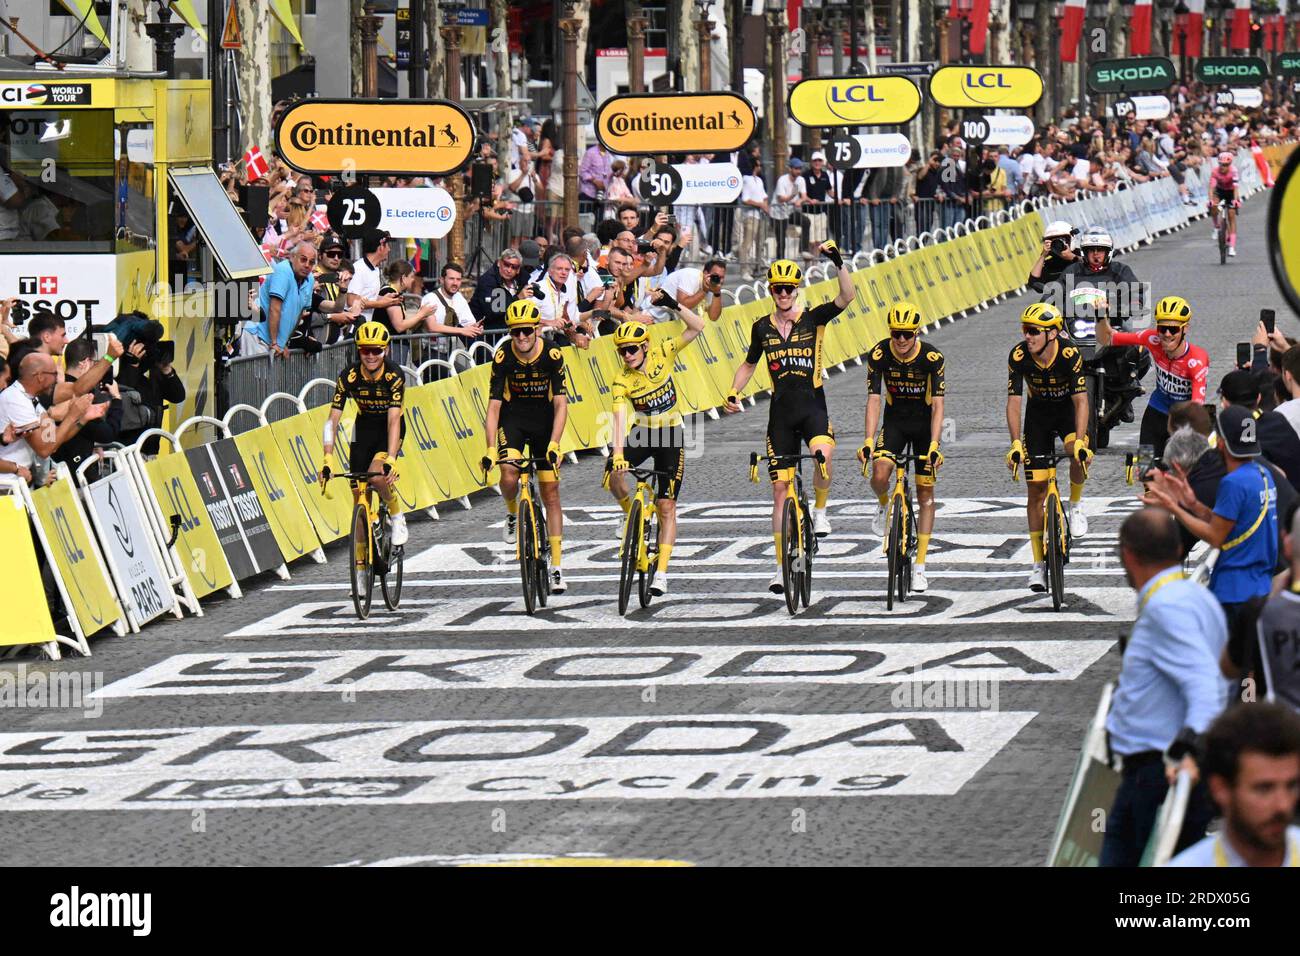 Jonas Vingegaard Denmark Jumbo-Visma team rides into Paris and final stage in yellow to win his 2nd tour de frabce Stock Photo